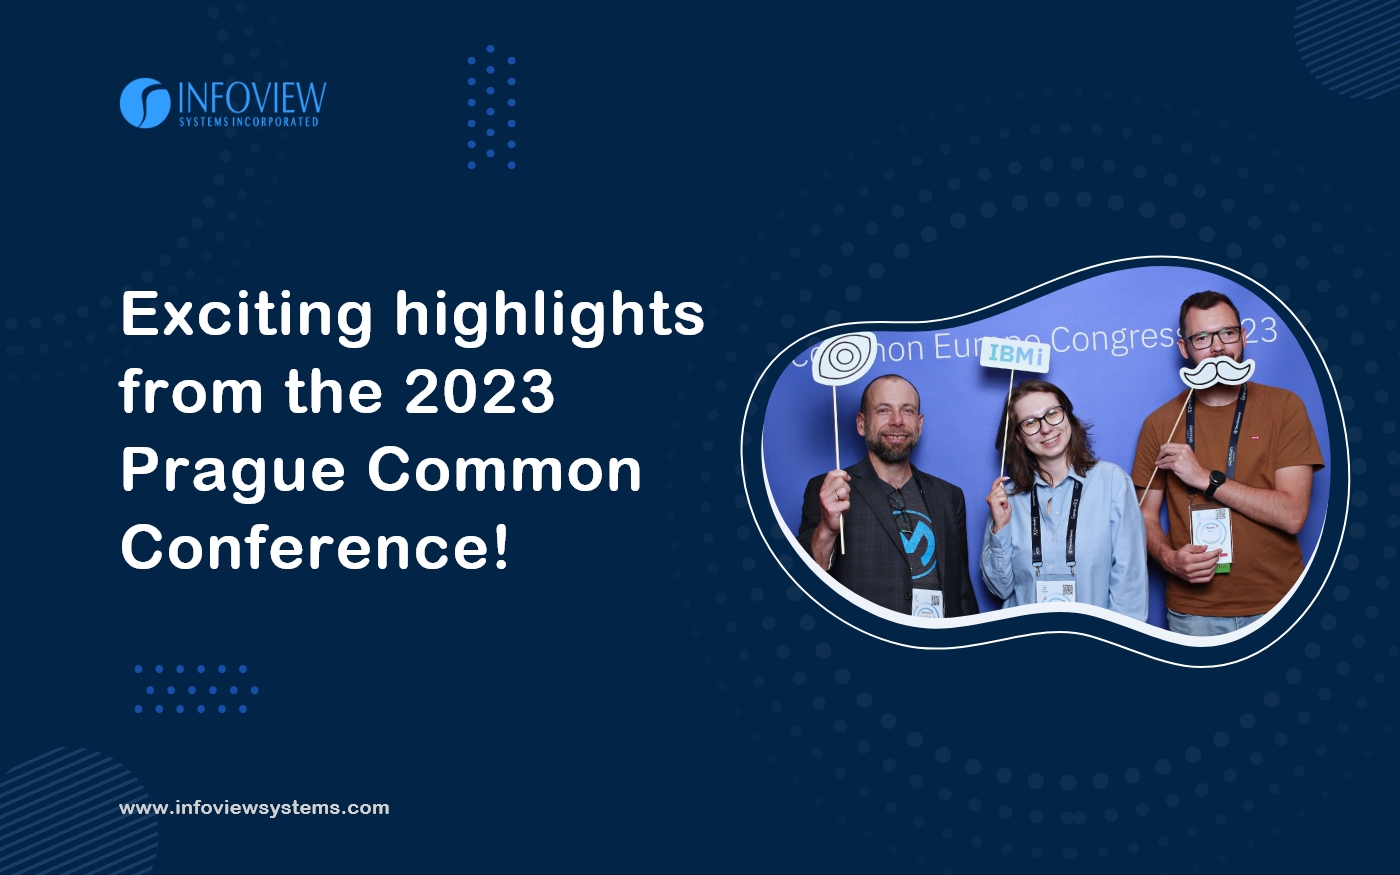 Exciting highlights from the 2023 Prague Common Conference!